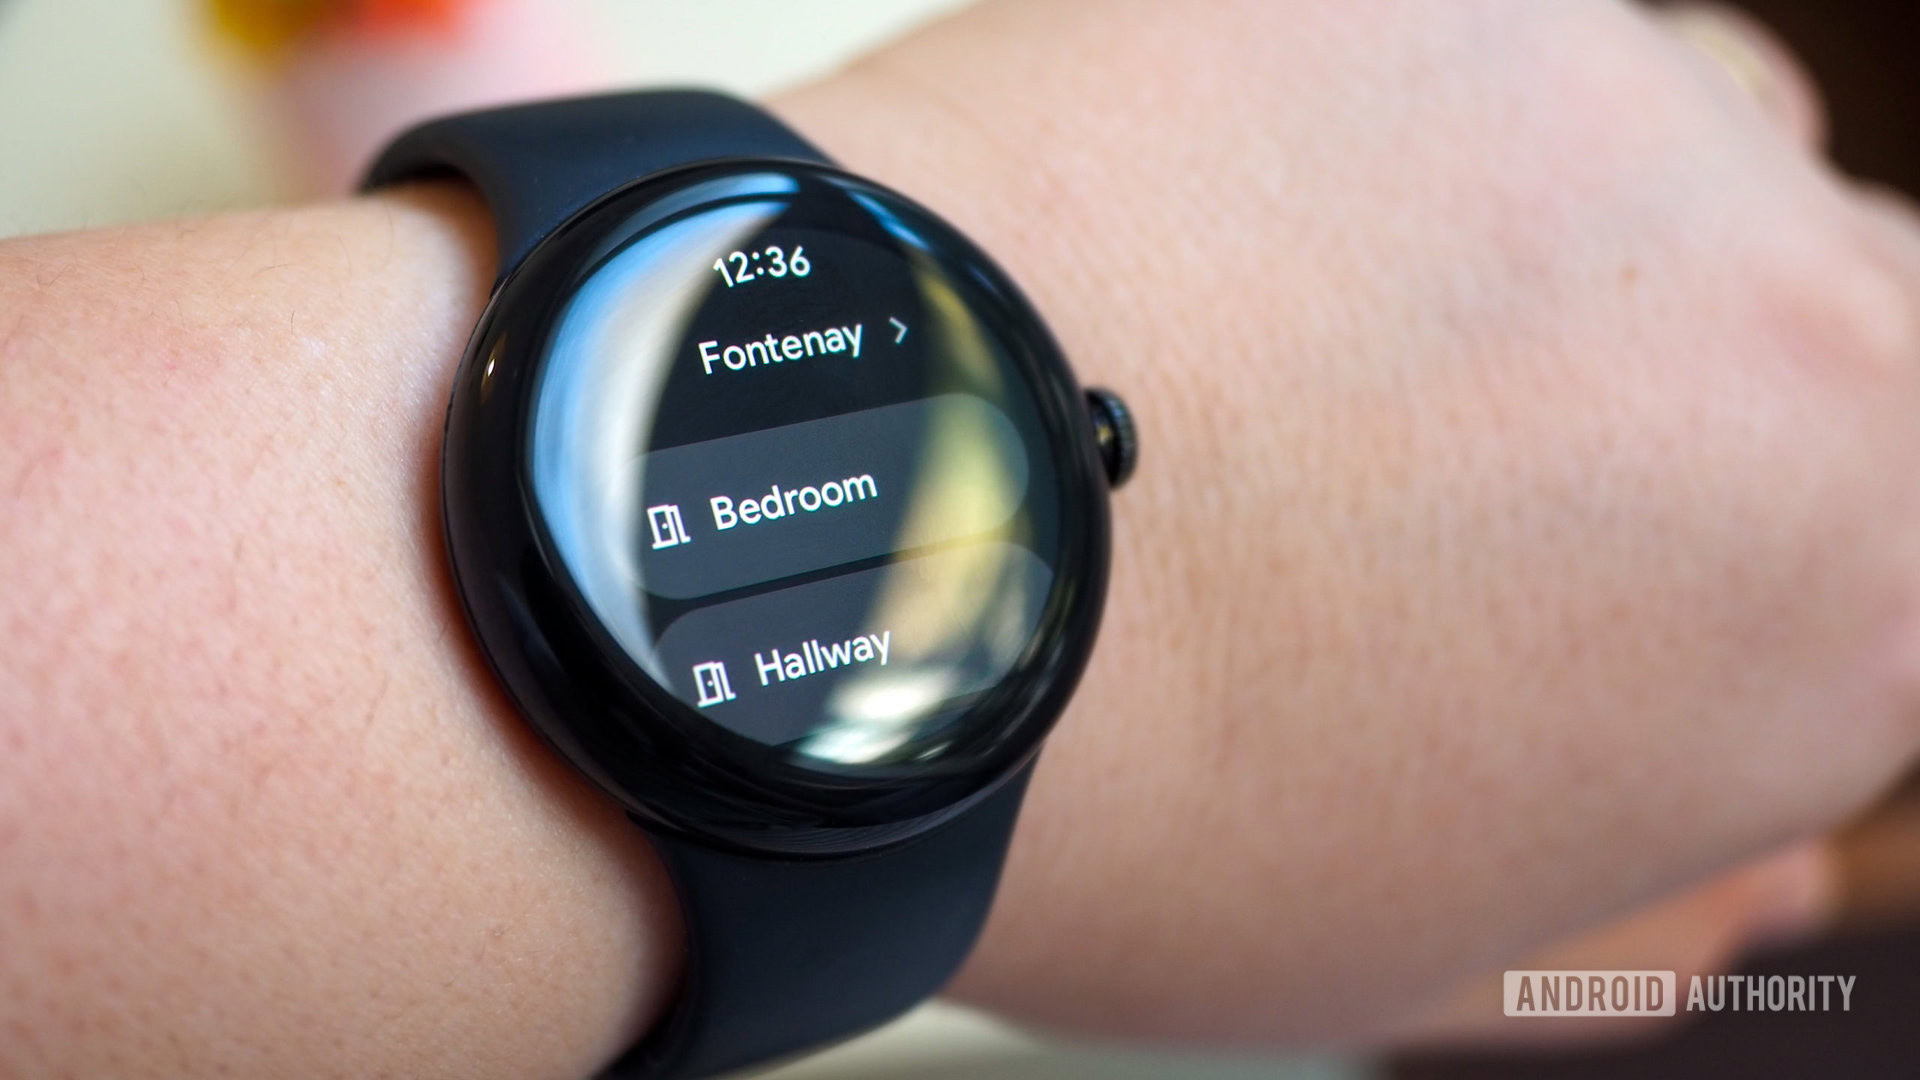 Wear OS: The Ultimate Guide to Google's Smartwatch OS